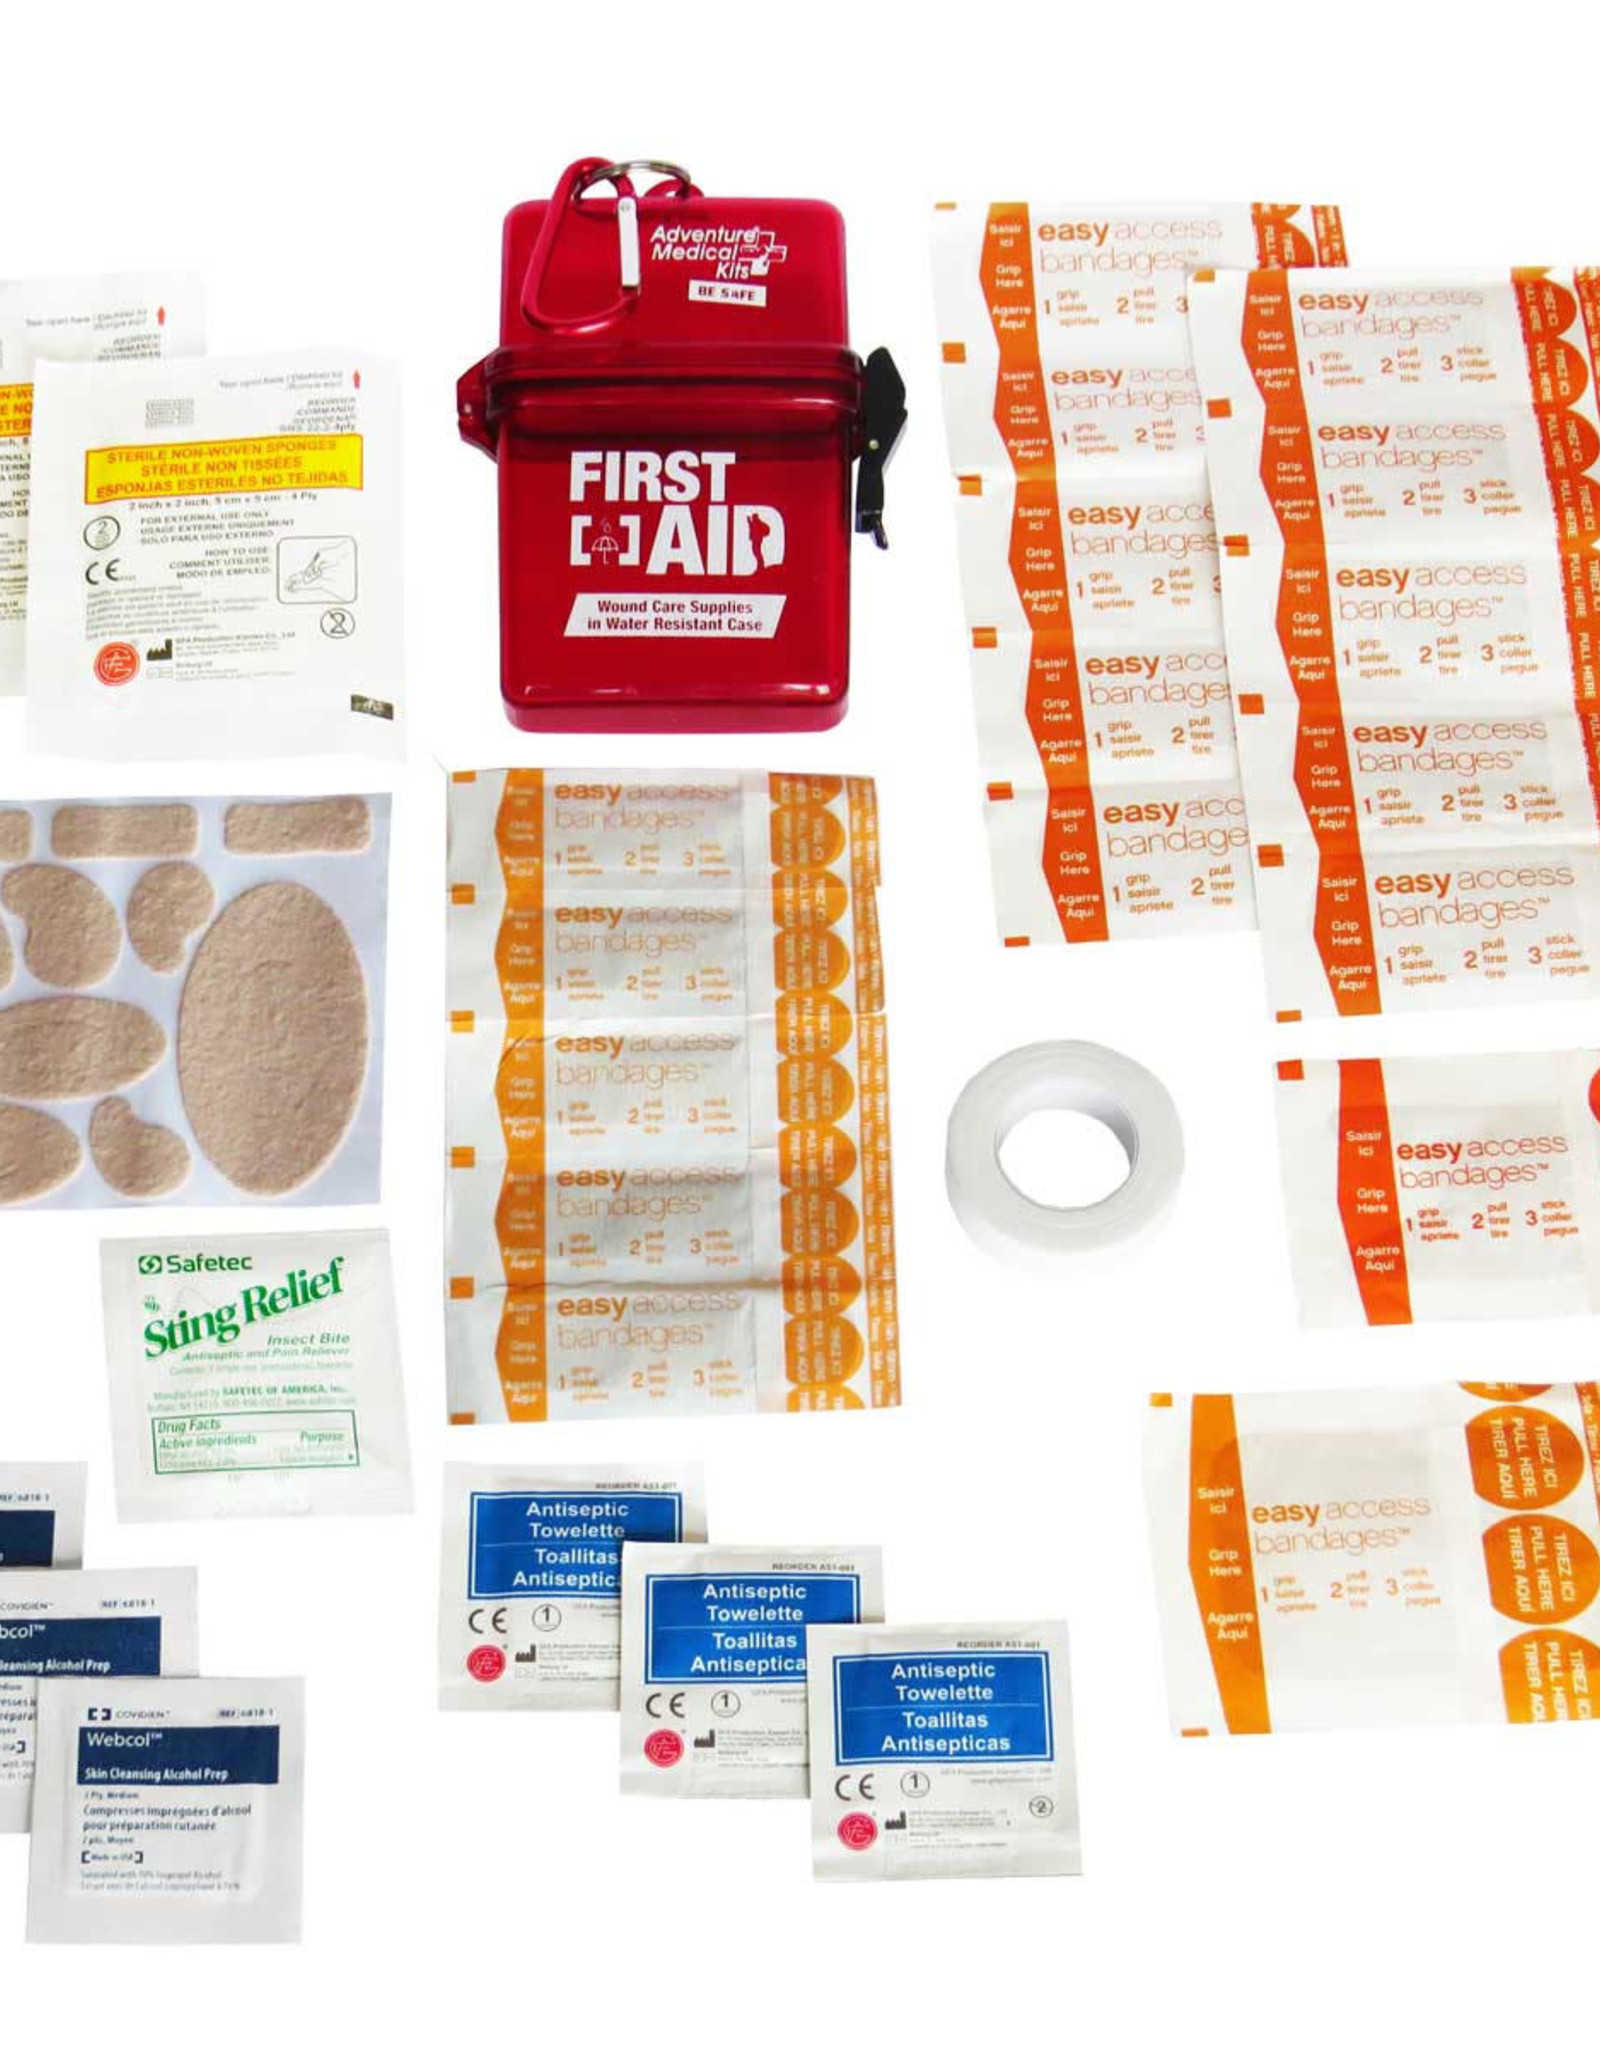 GIRL SCOUTS OF THE USA Water-Resistant First Aid Kit